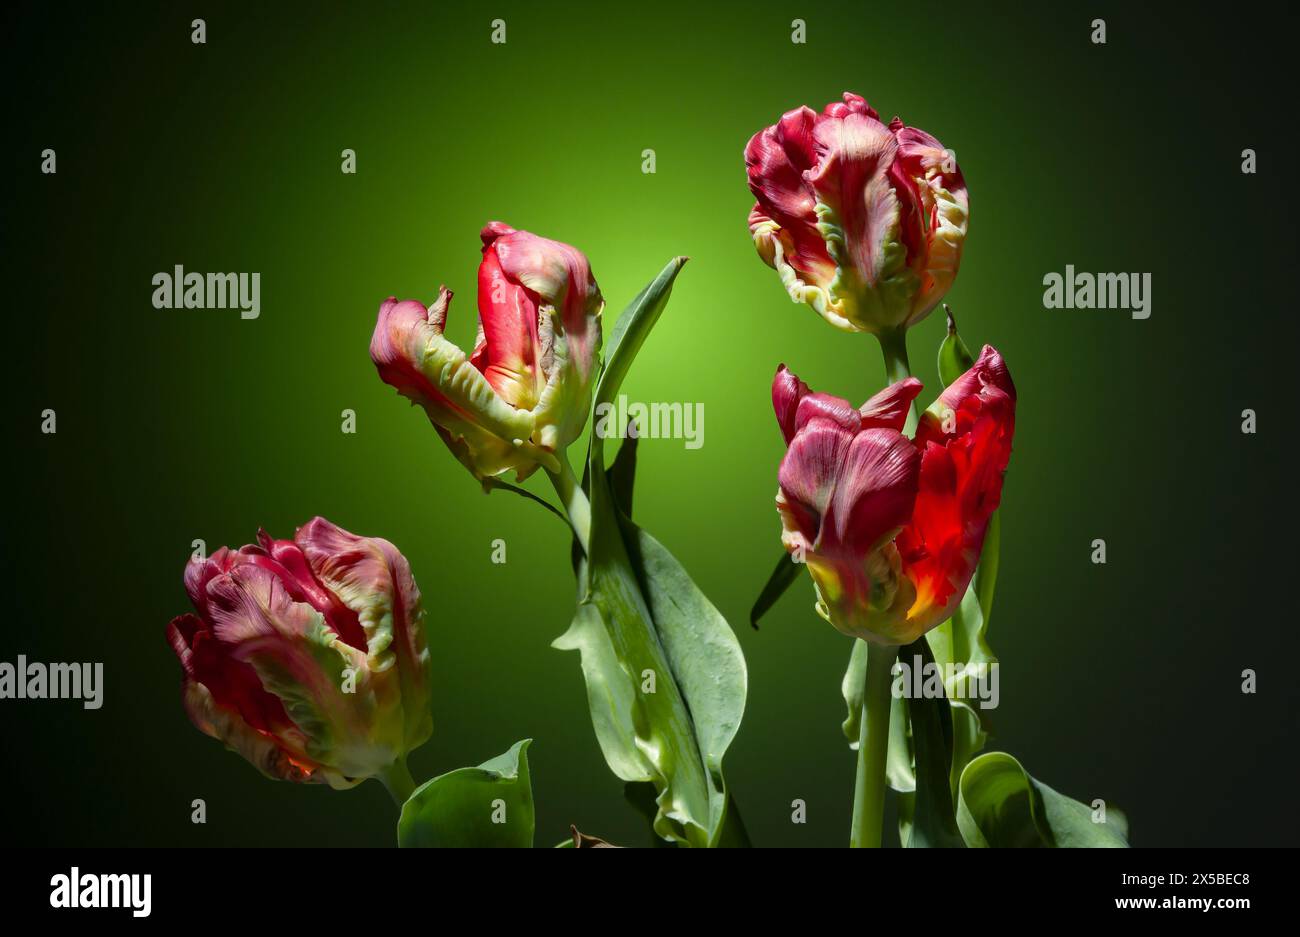 four red tulips with strange fluted petals, on a green grandient graduated background from close distance, still life with high dynamic range Stock Photo